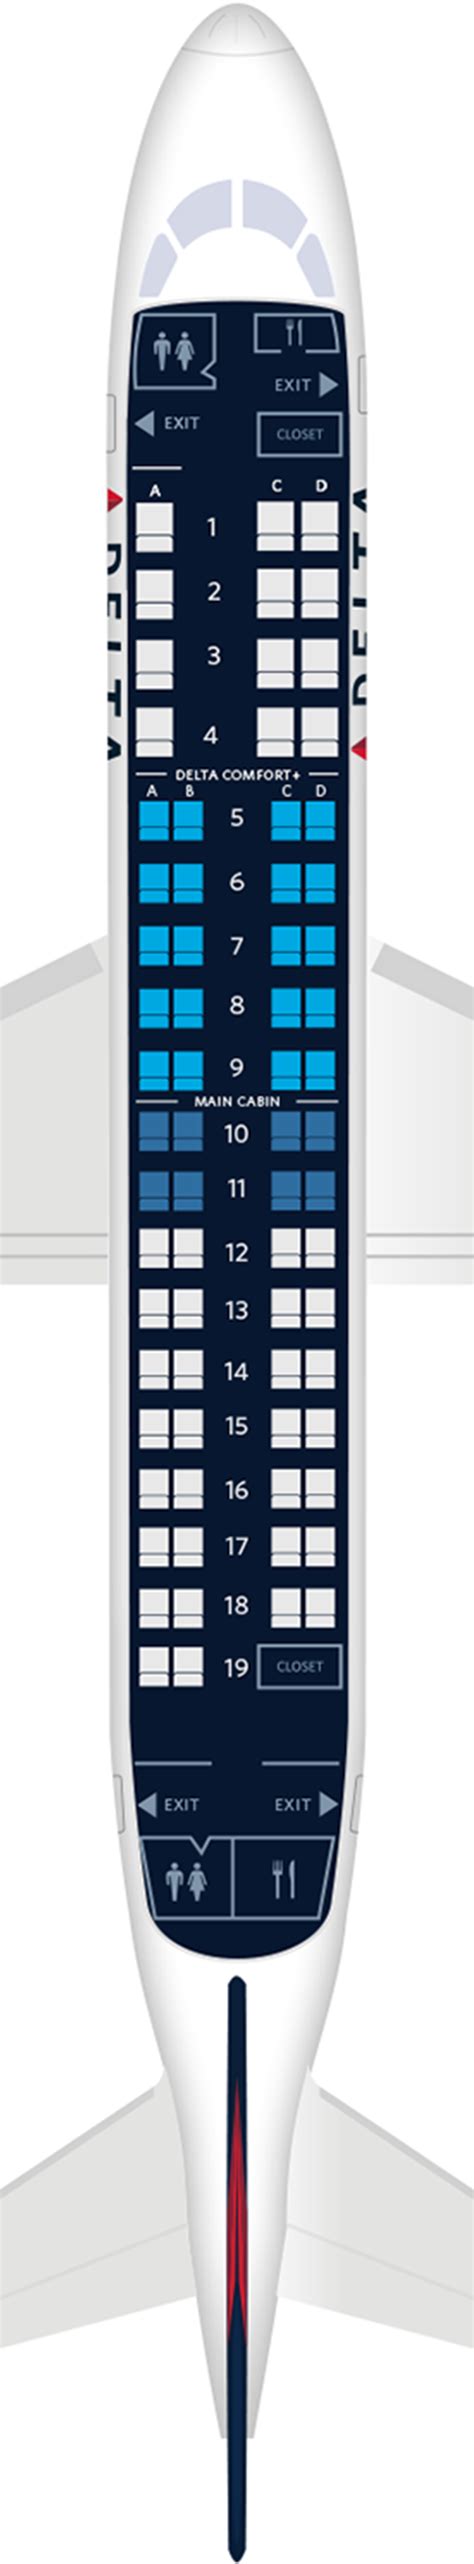 Embraer e175 seating. Things To Know About Embraer e175 seating. 